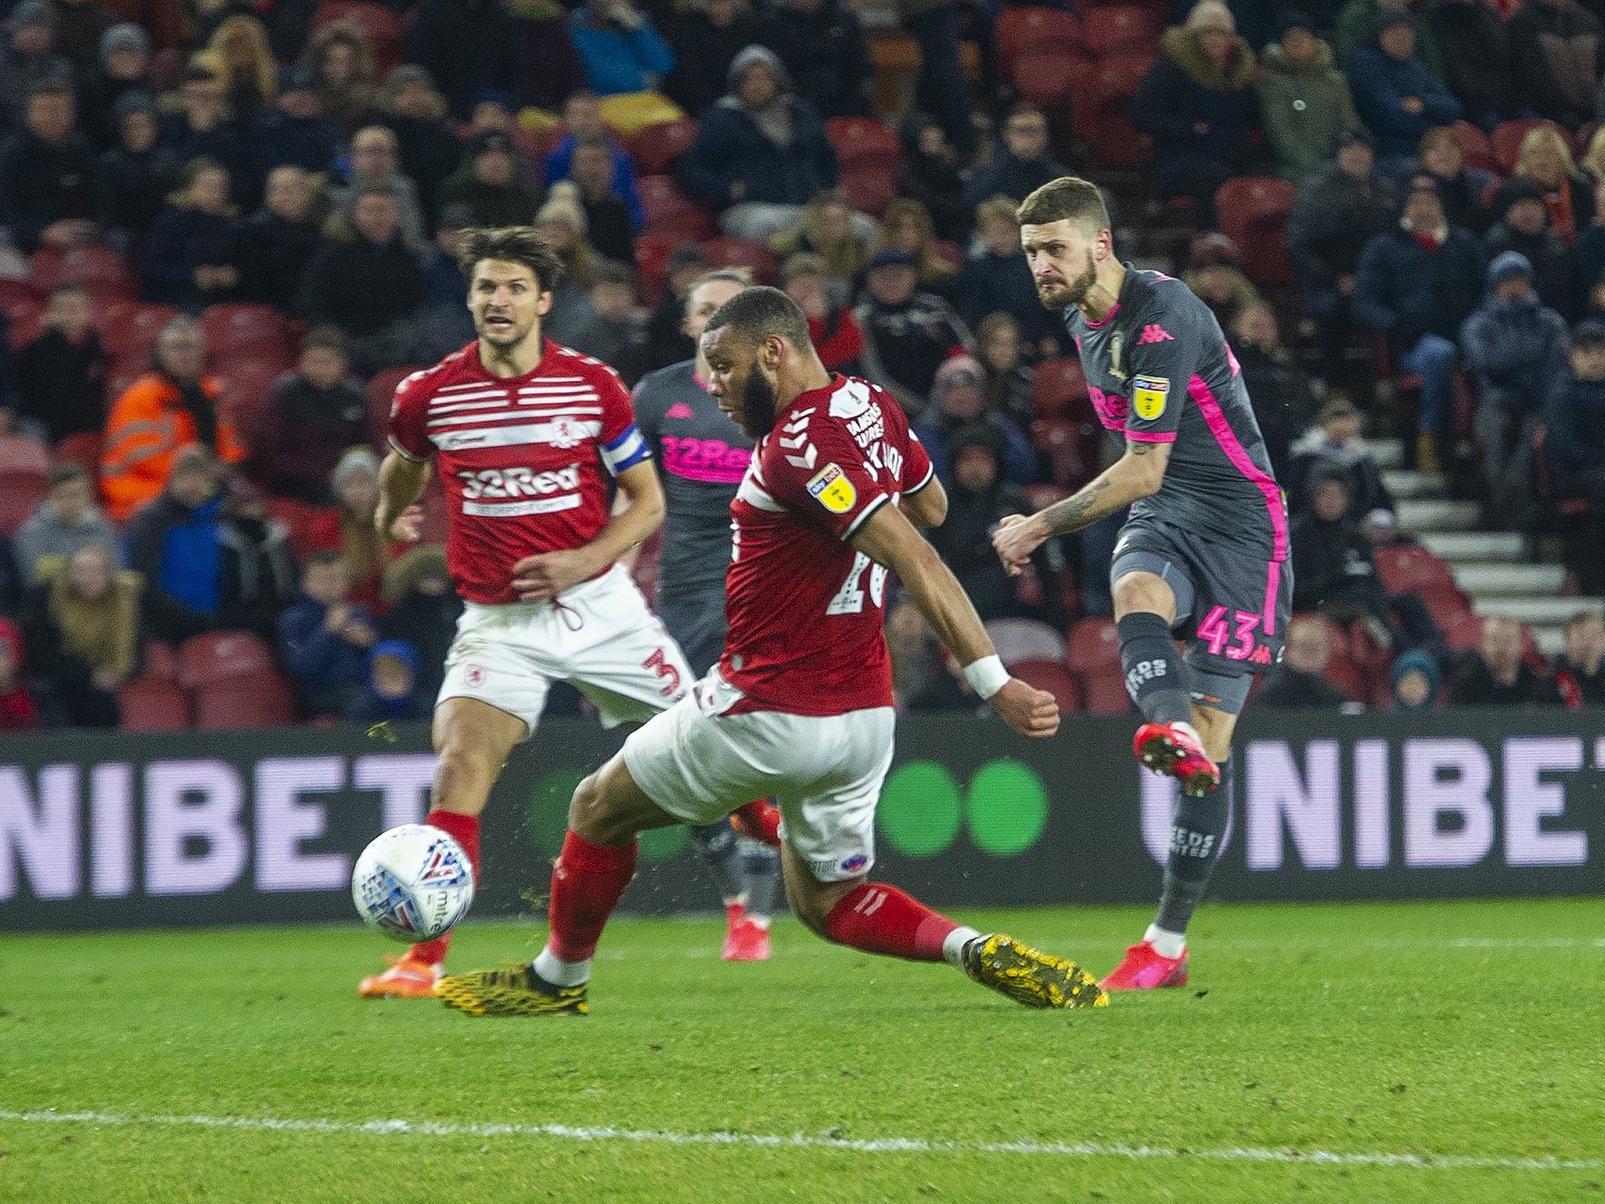 Mateusz Klich scored Leeds United's winner at Middlesbrough in his 83rd consecutive league appearance (Pic: Tony Johnson)